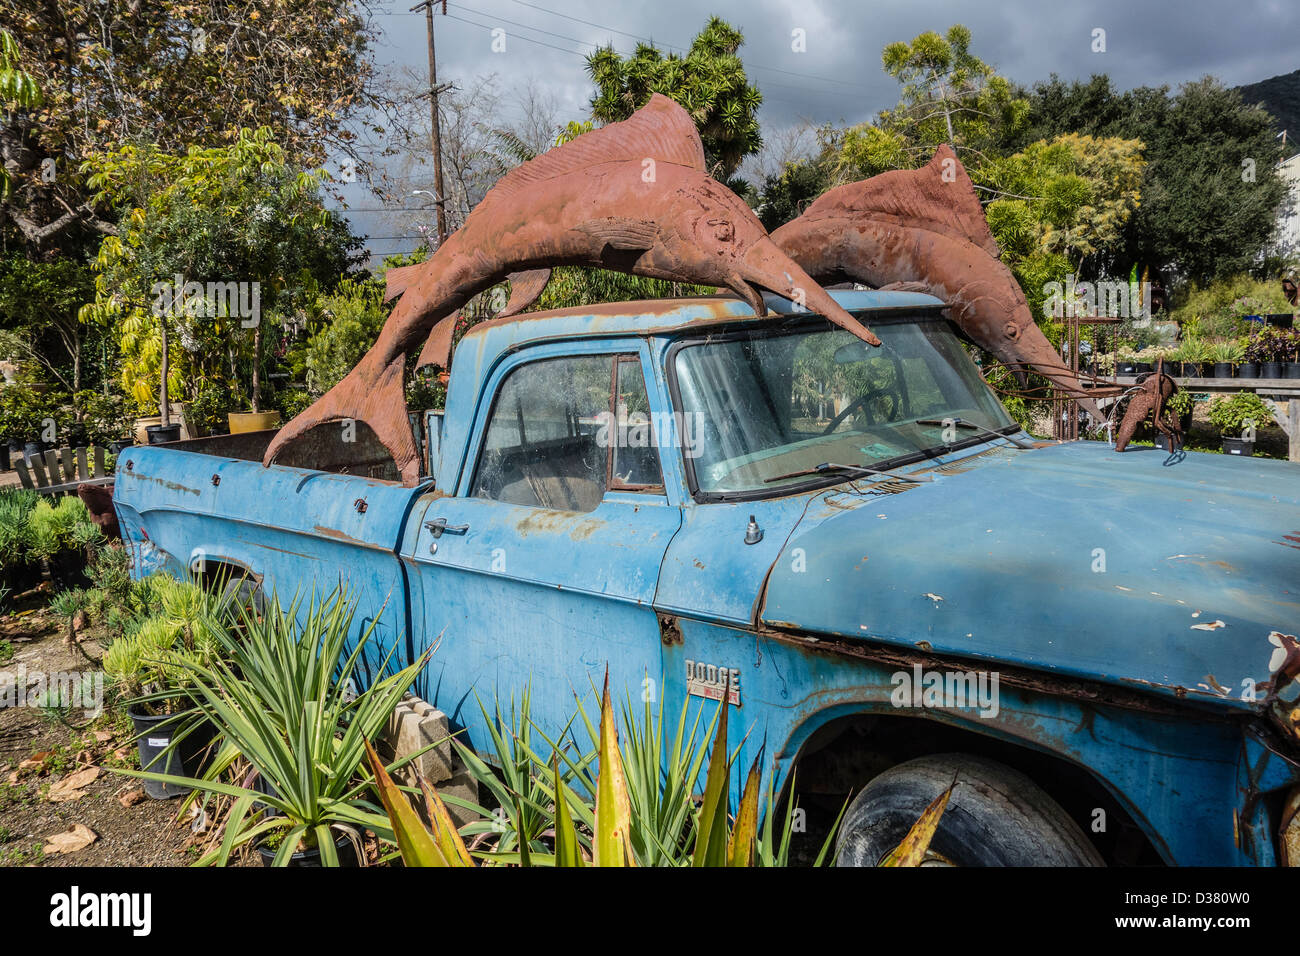 Two large rusted steel dolphin sculptures sit atop an old blue Dodge pickup truck that is no longer in service. Stock Photo